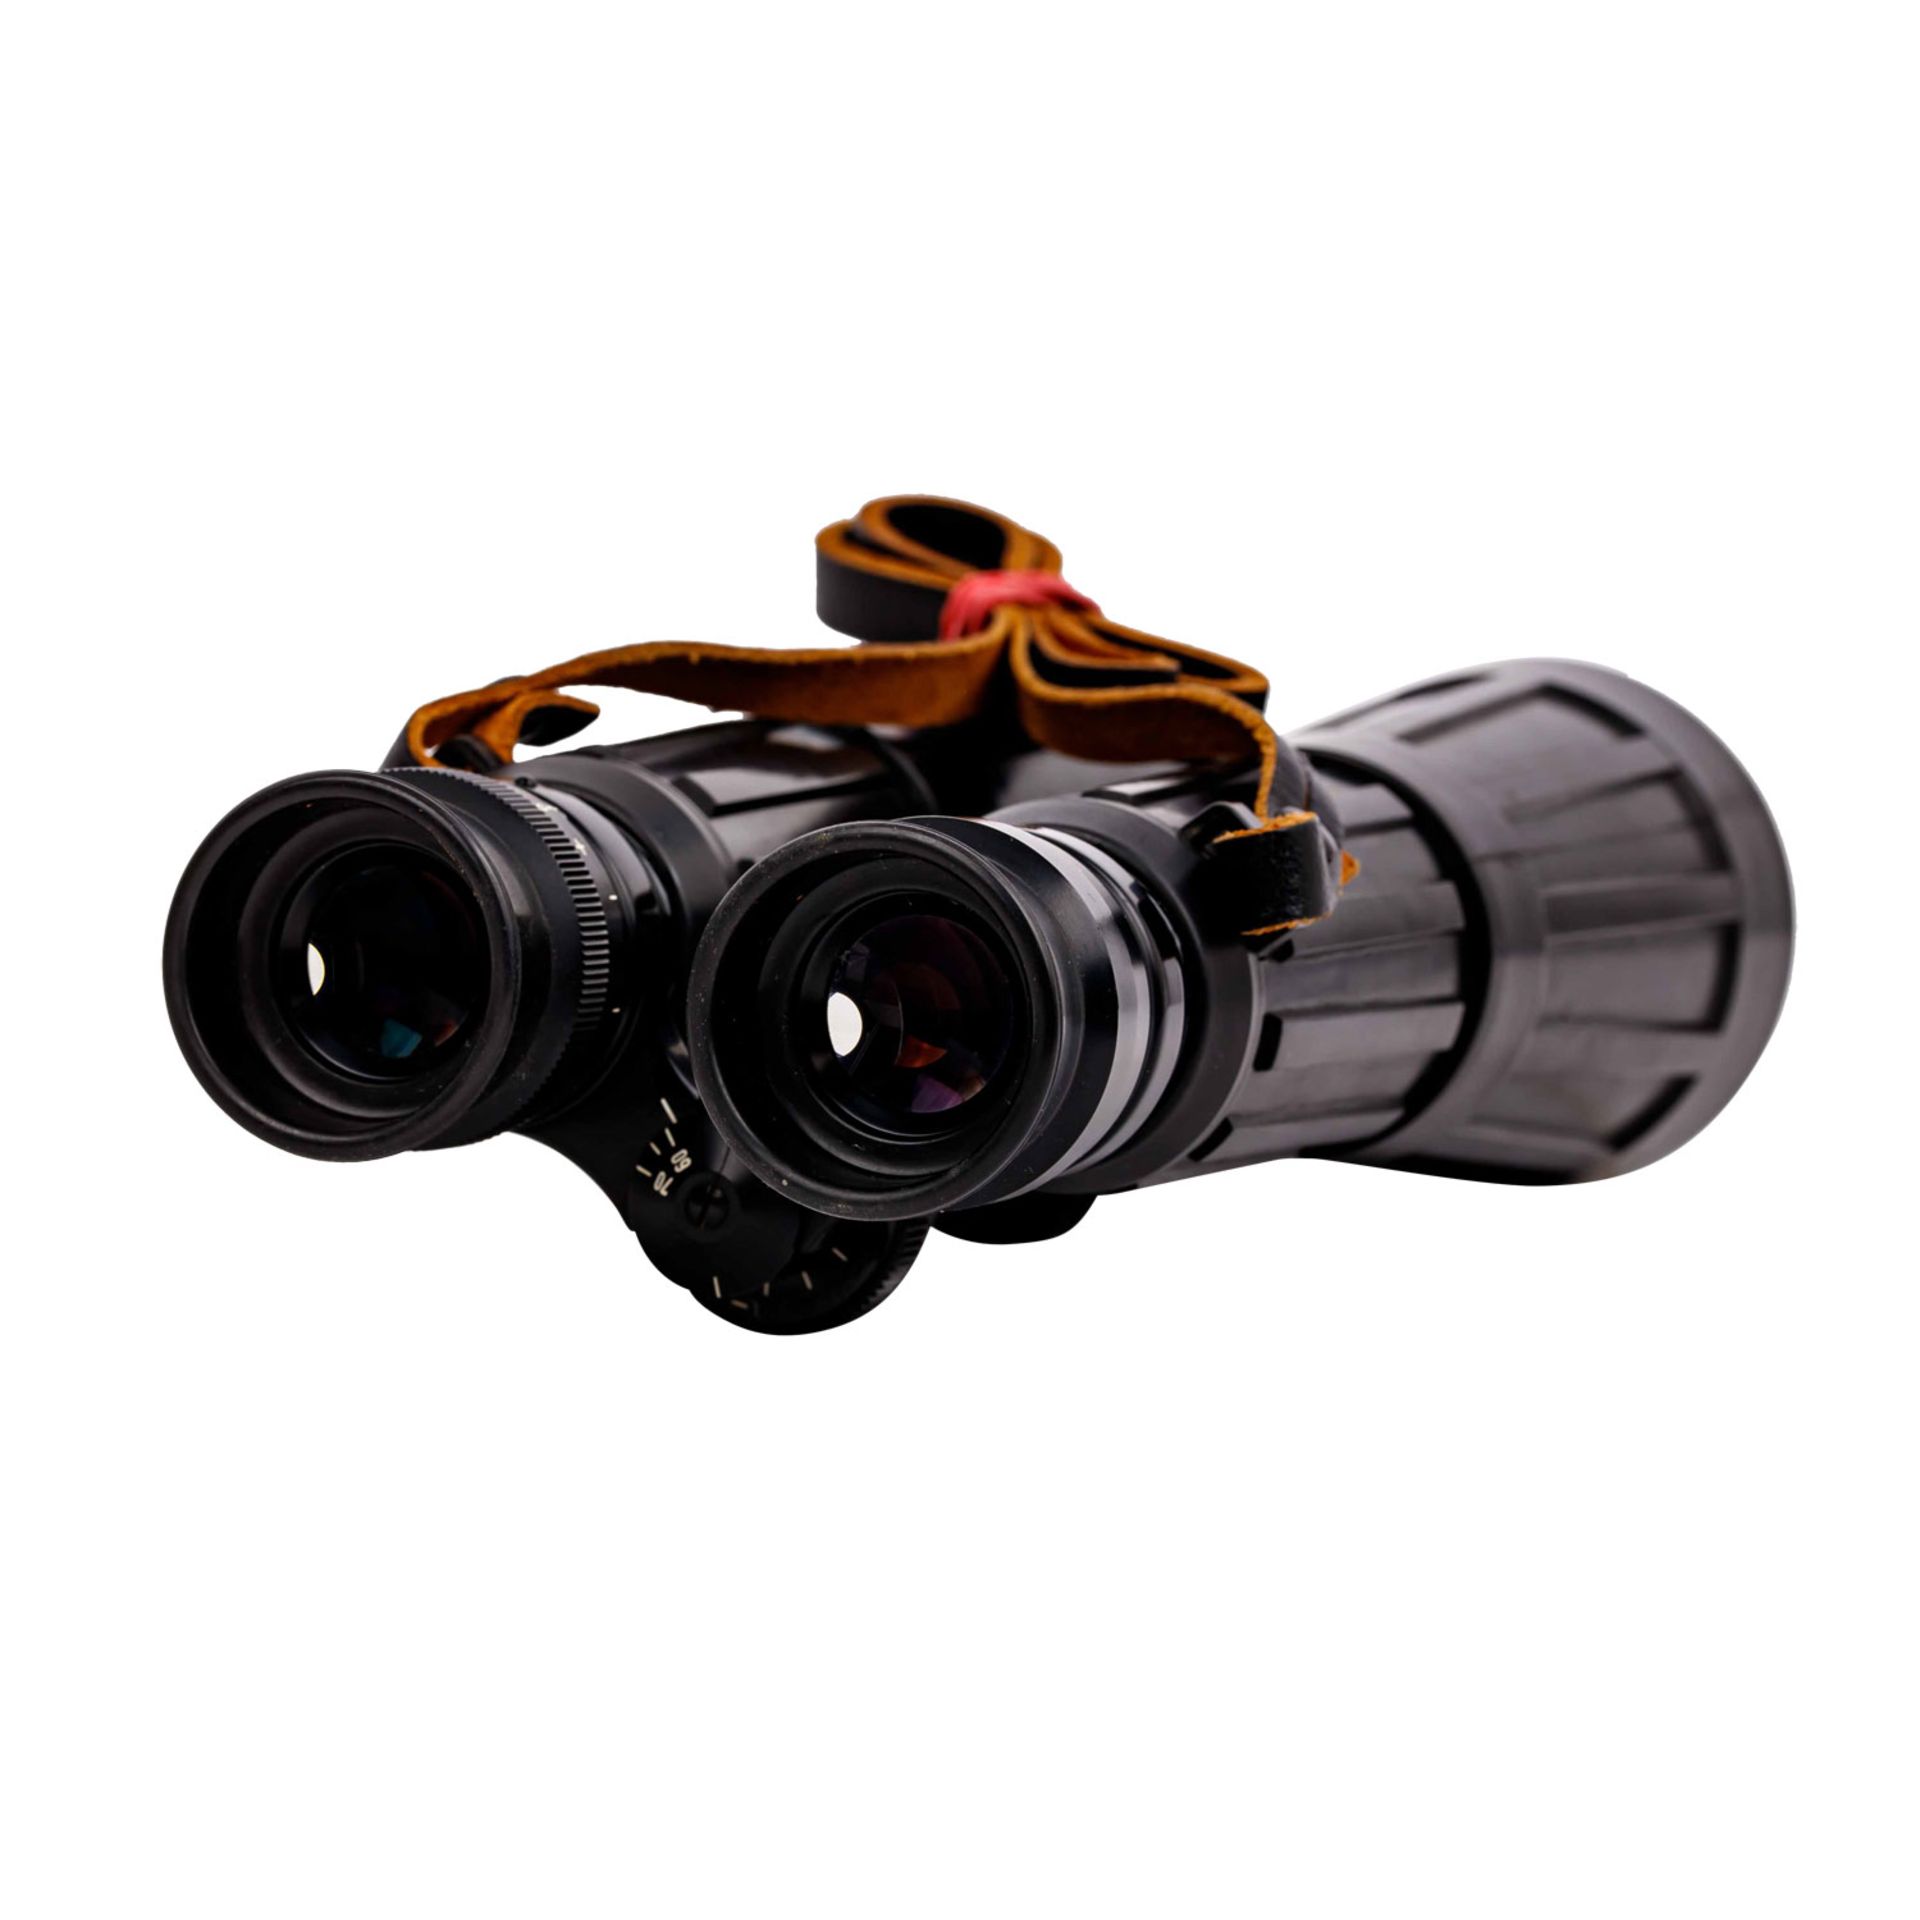 FERNGLAS ZEISS DIALYT 8x56 B, T*, - Image 8 of 8